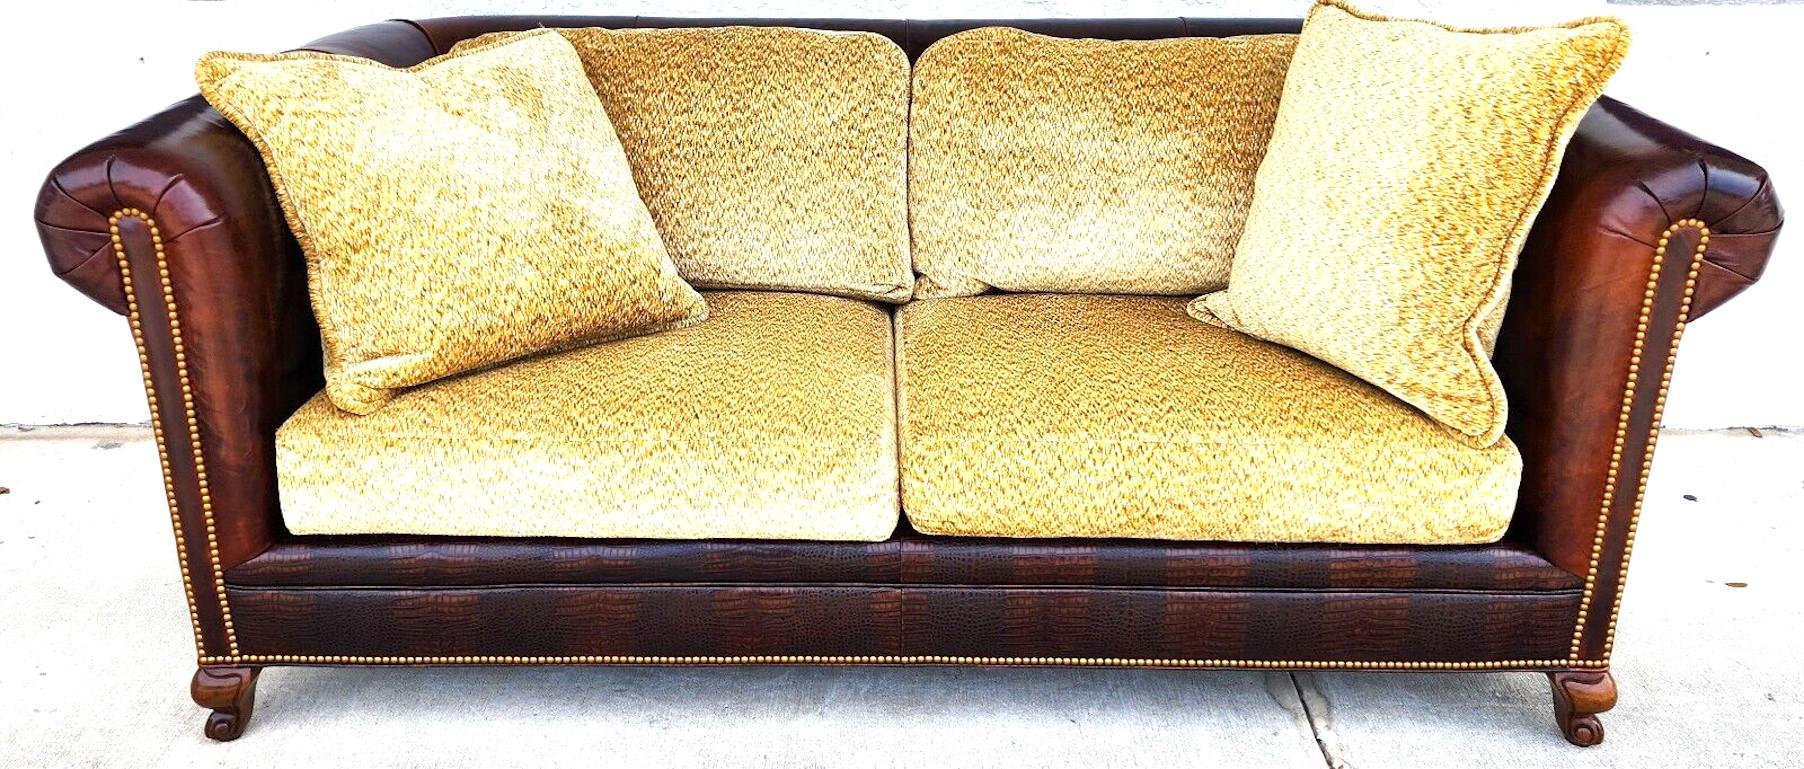 For FULL item description click on CONTINUE READING at the bottom of this page.
Offering One Of Our Recent Palm Beach Estate Fine Furniture Acquisitions Of A
Ralph Lauren Style BENTLEY CHURCHILL Top-Grade Leather and Fabric Sofa

This is an